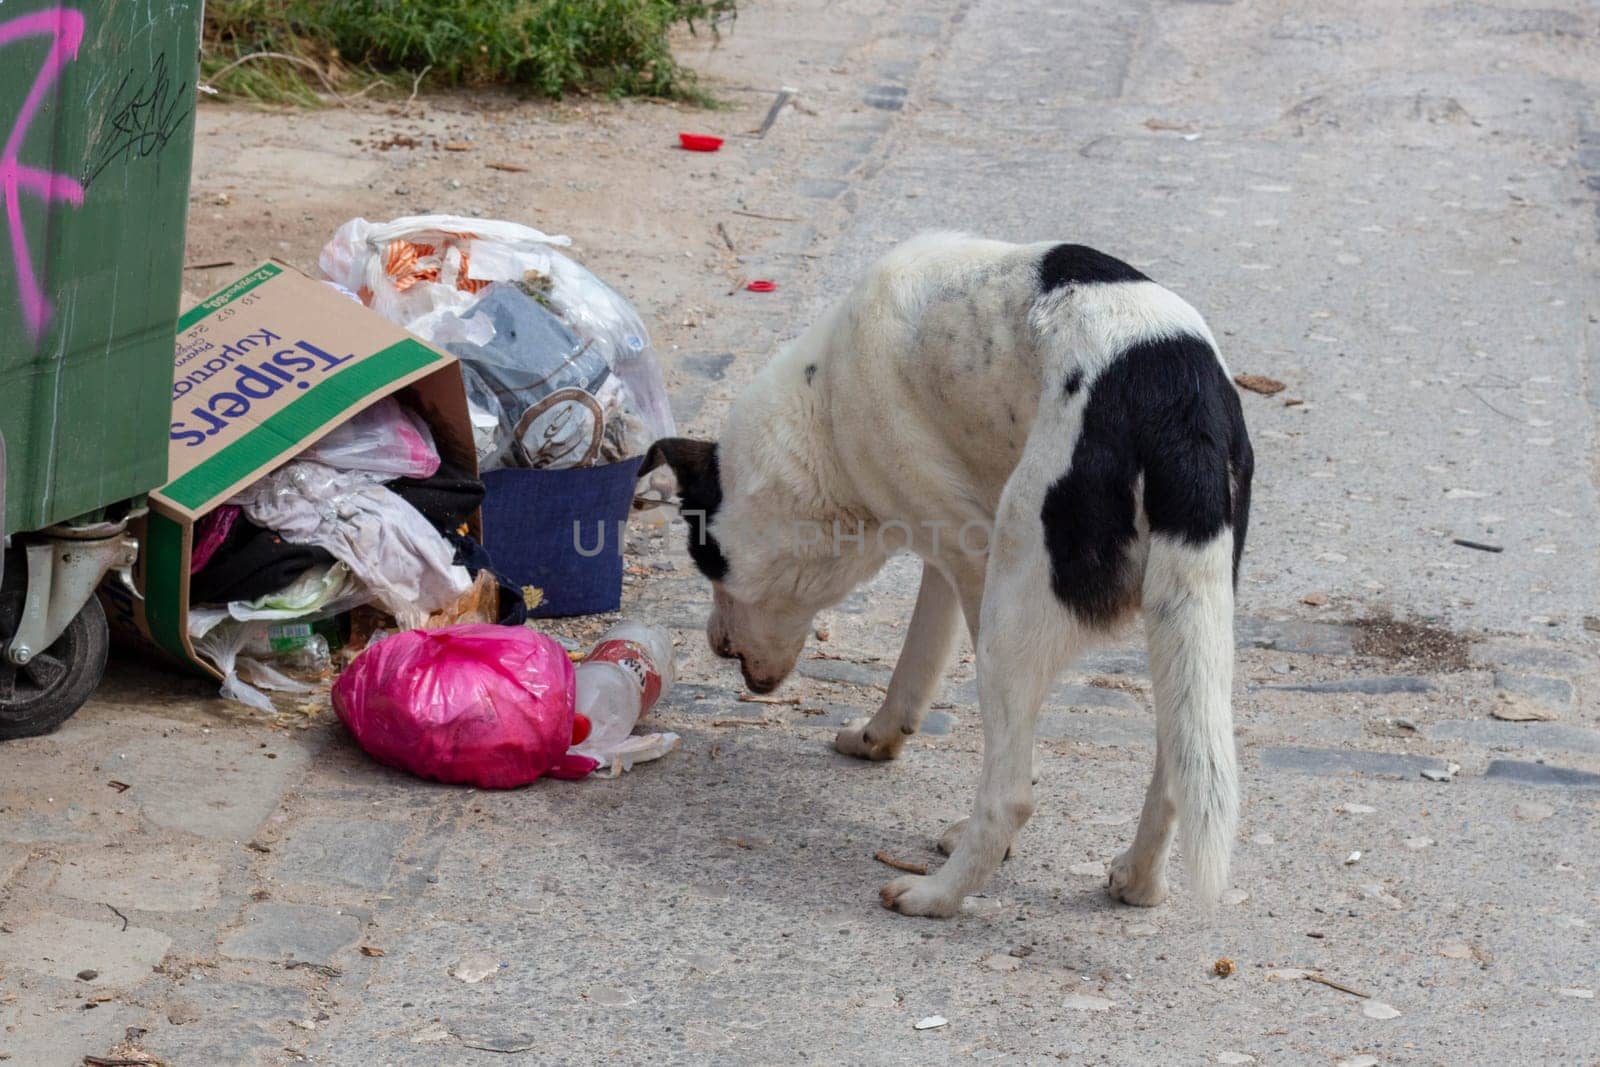 Resilience and Compassion in the Urban Jungle: Stray Dog Seeking Food Beside Trash Bin, Sheltered Cat Finding Solace - Animal Welfare Amidst Adversity by DakotaBOldeman